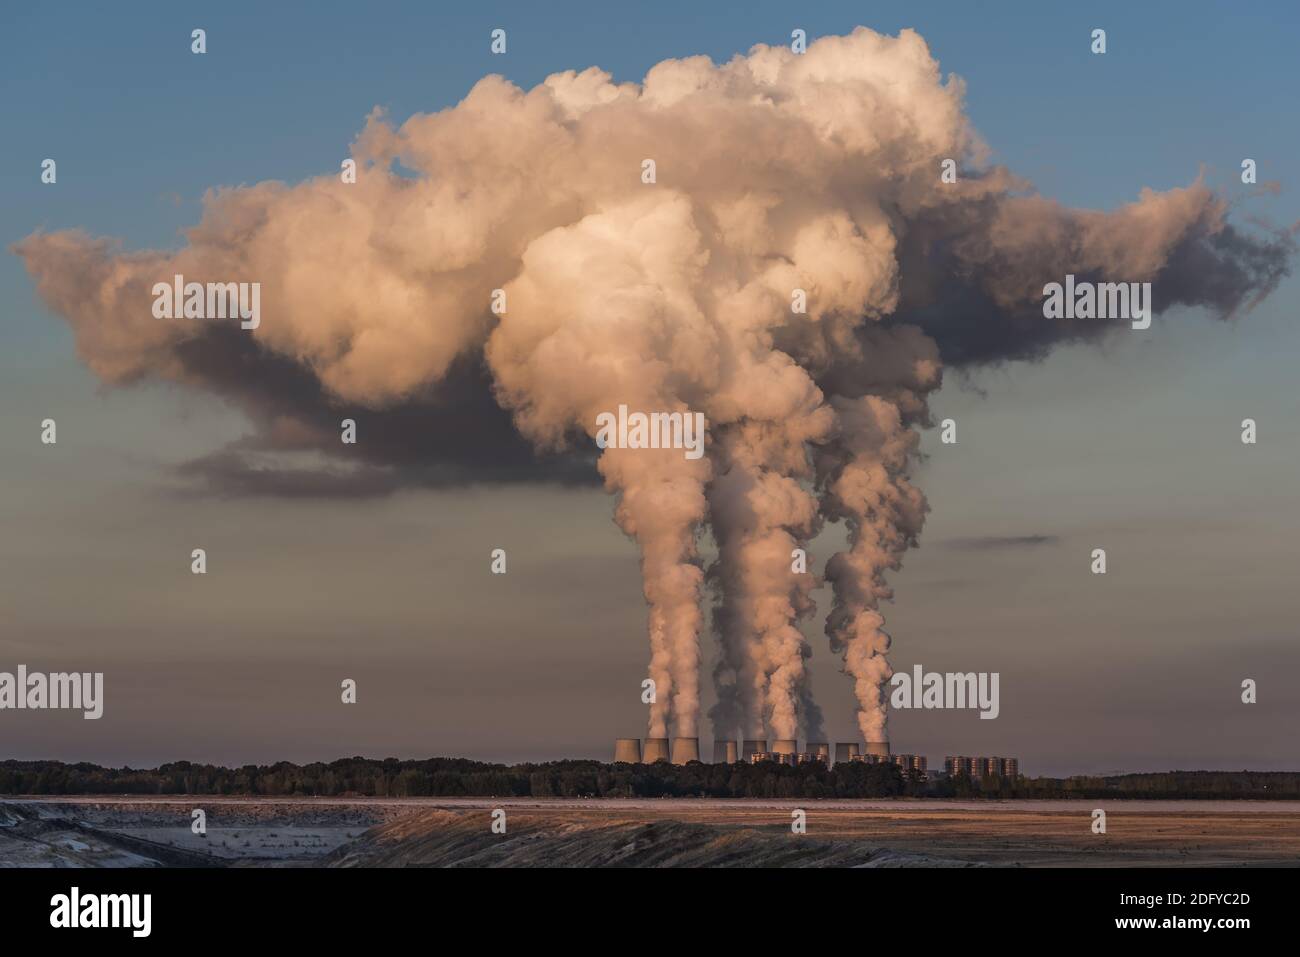 Lignite power plant with large cloud of smoke Stock Photo